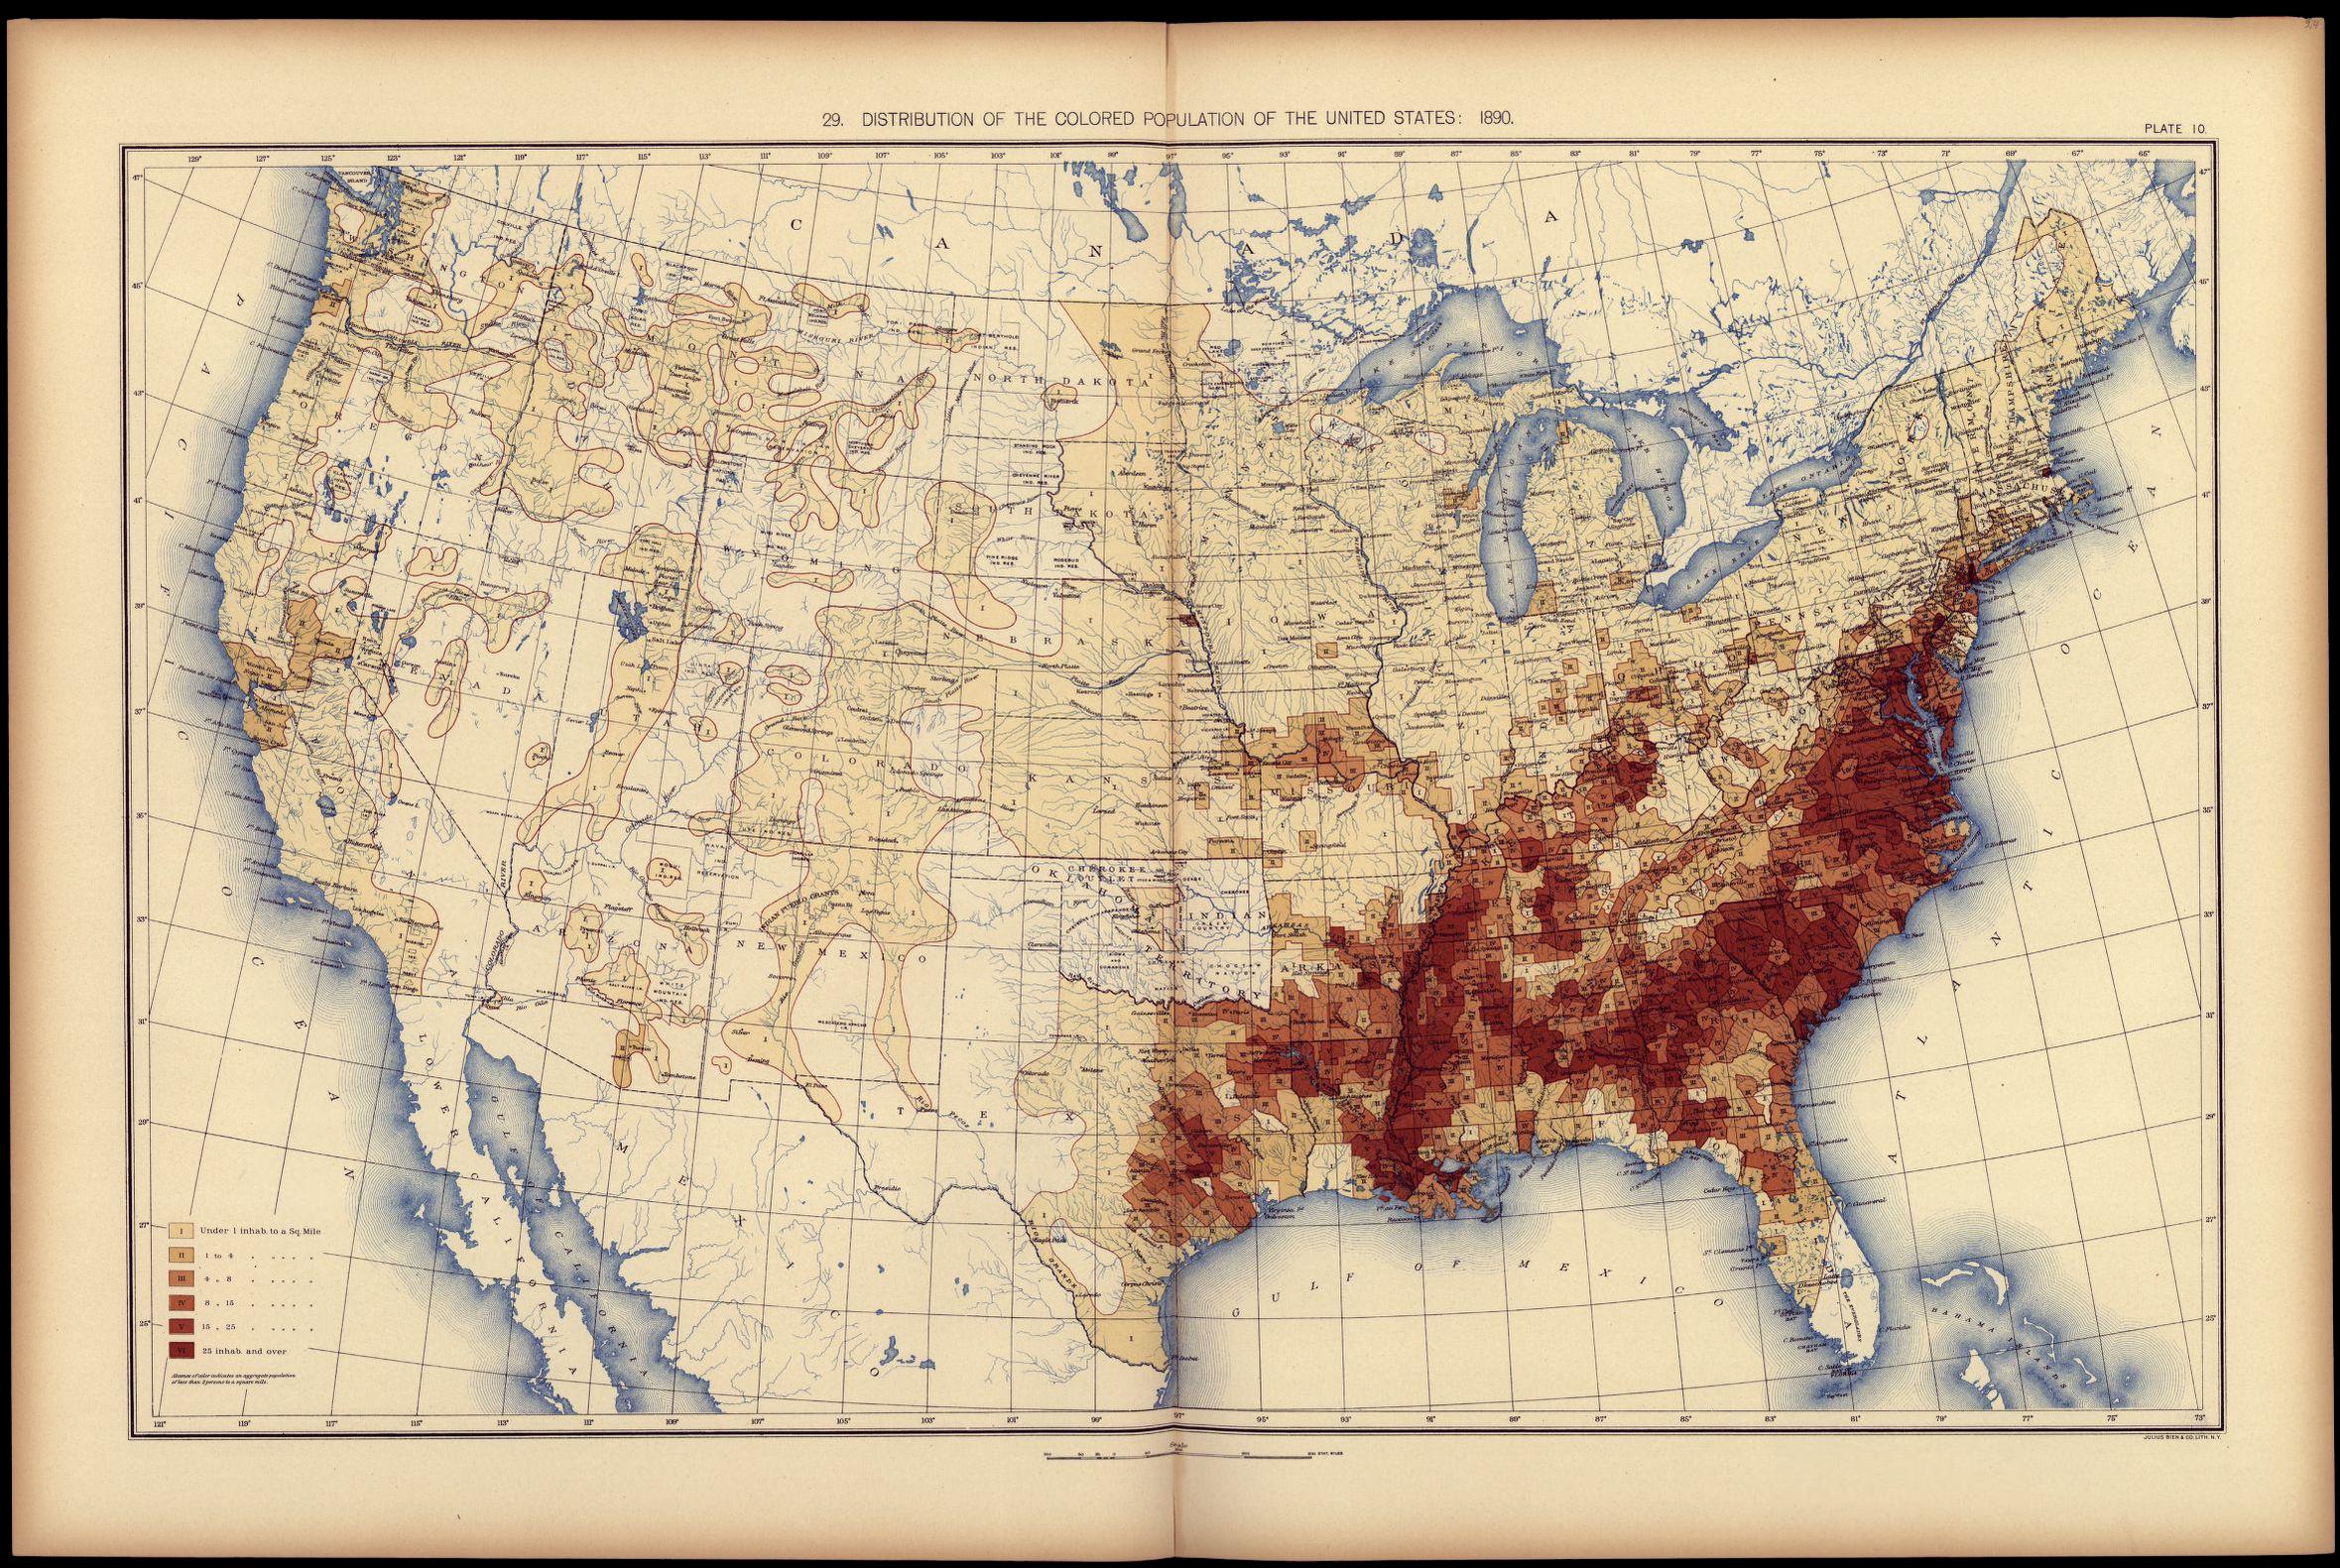 Distribution of the Colored population of the United States: 1890